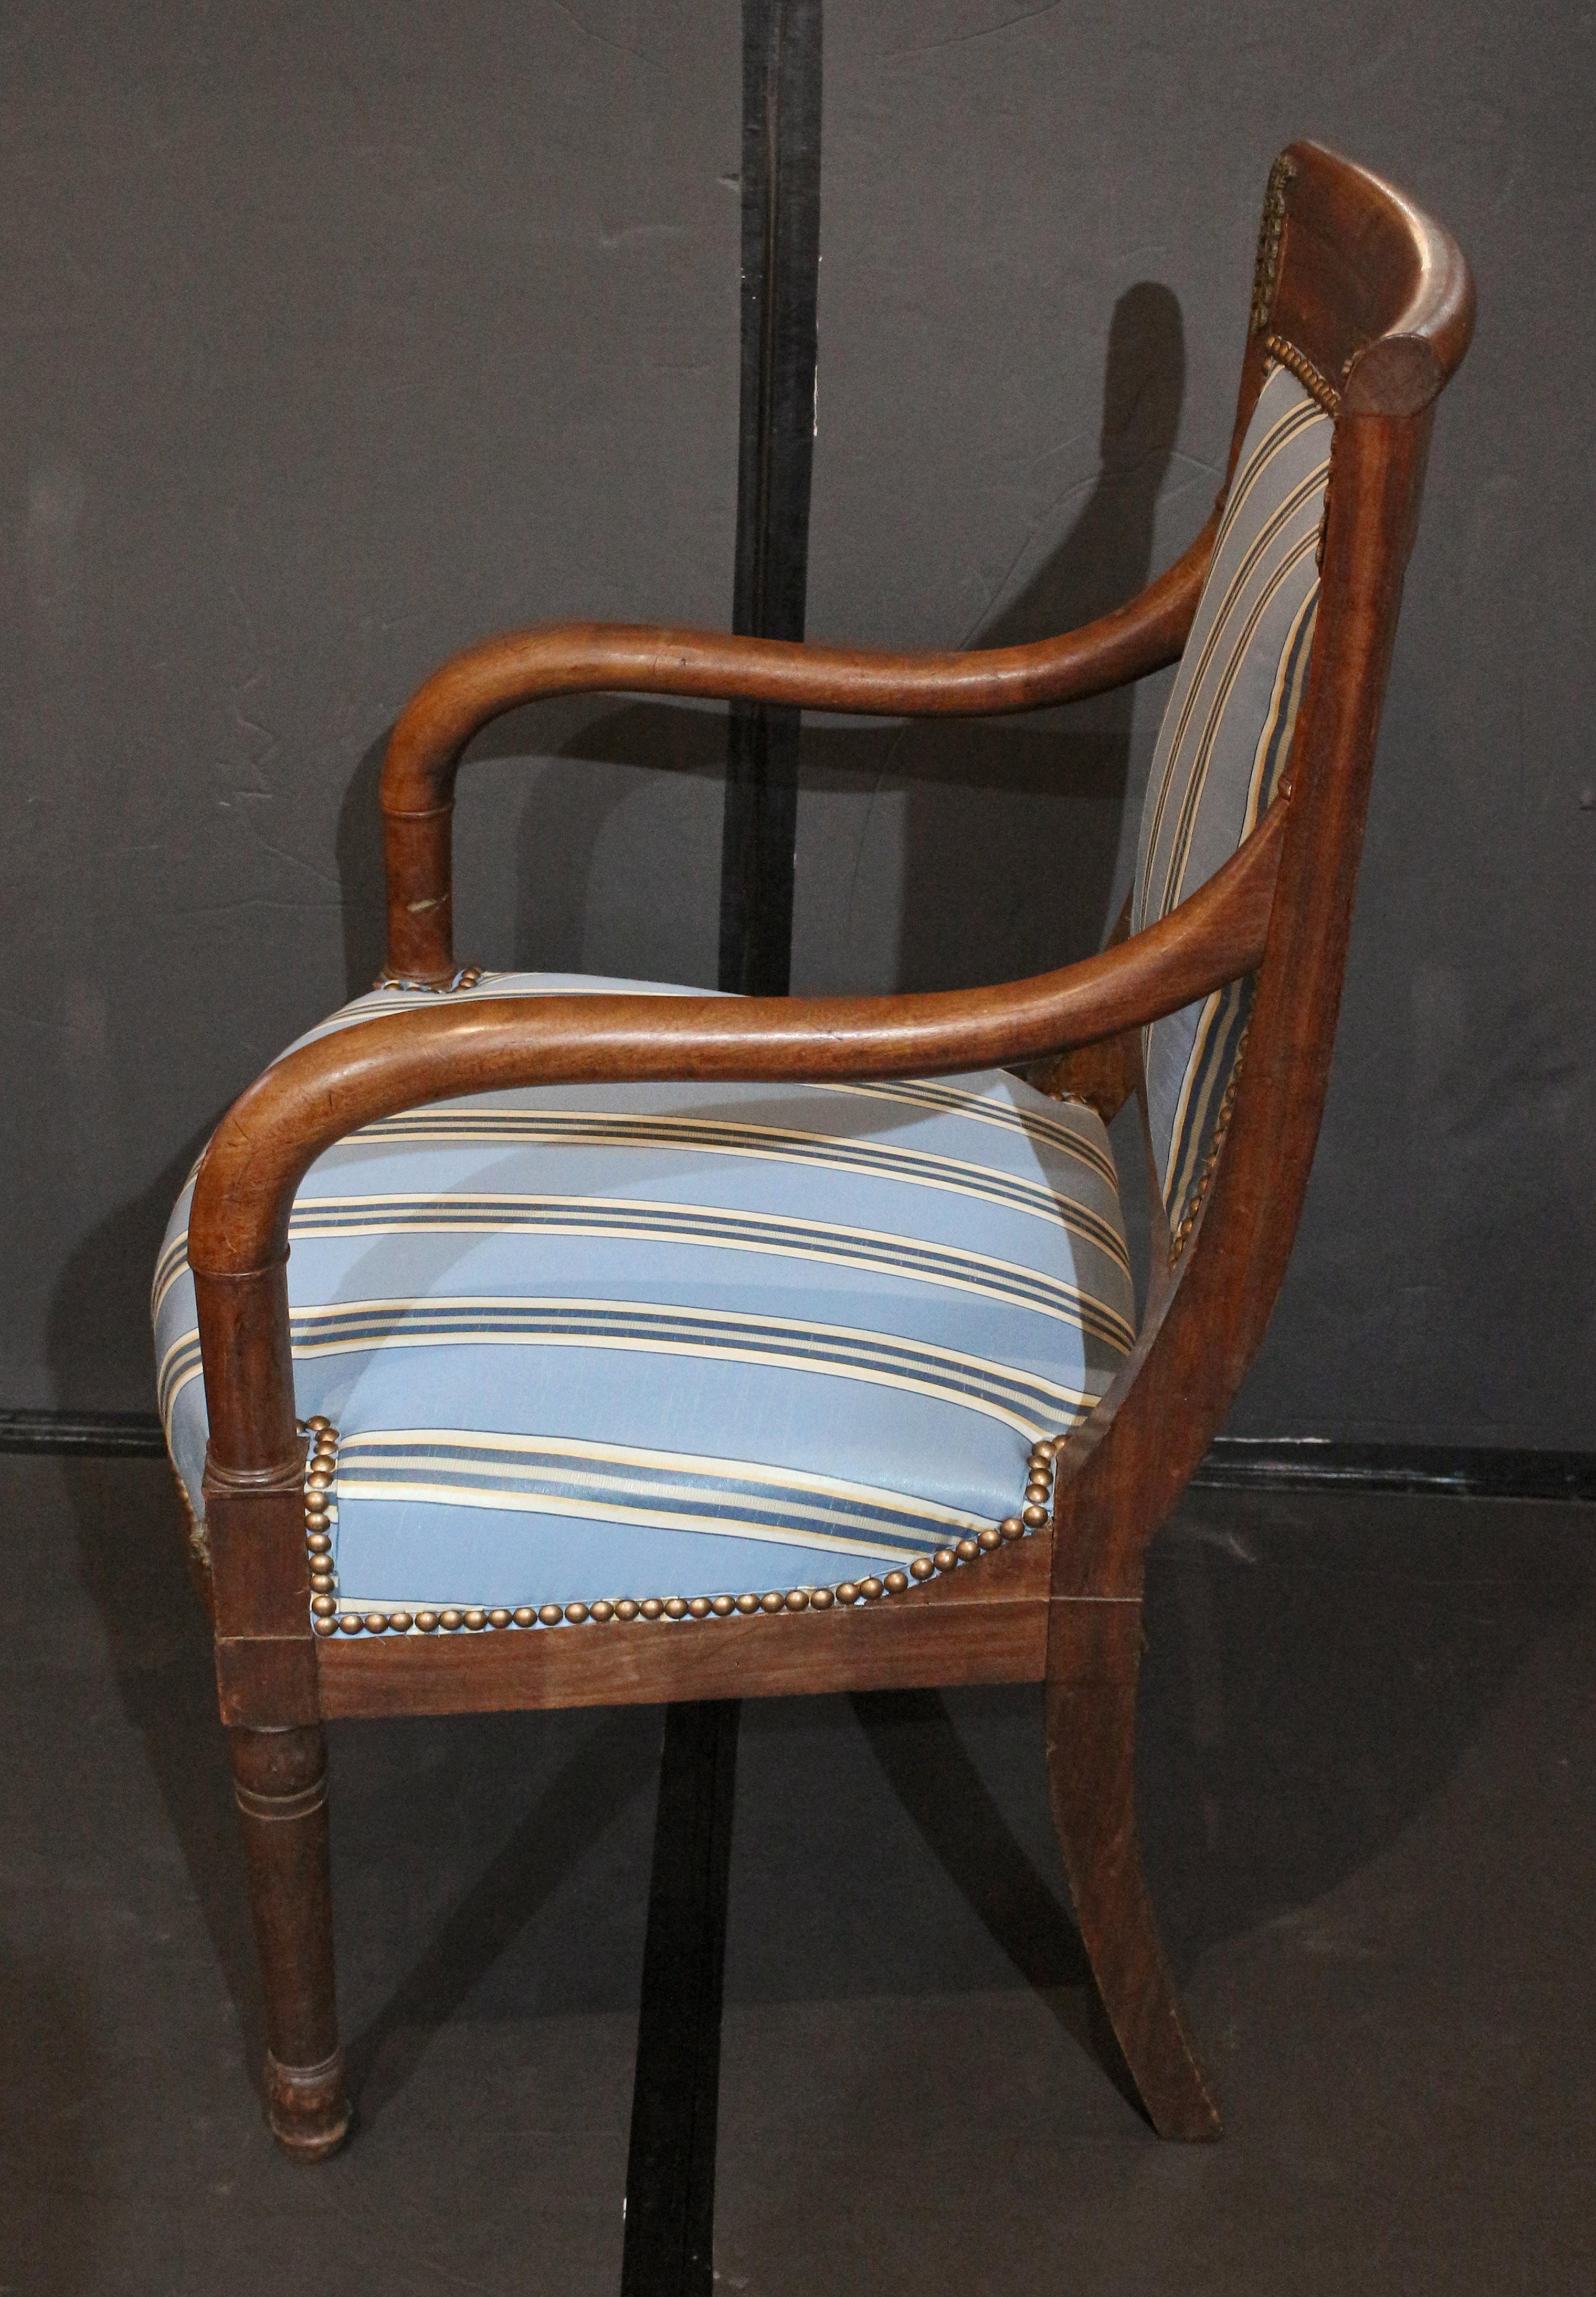 Circa 1800-1815 French Directoire to Empire Period Fauteuil In Good Condition For Sale In Chapel Hill, NC